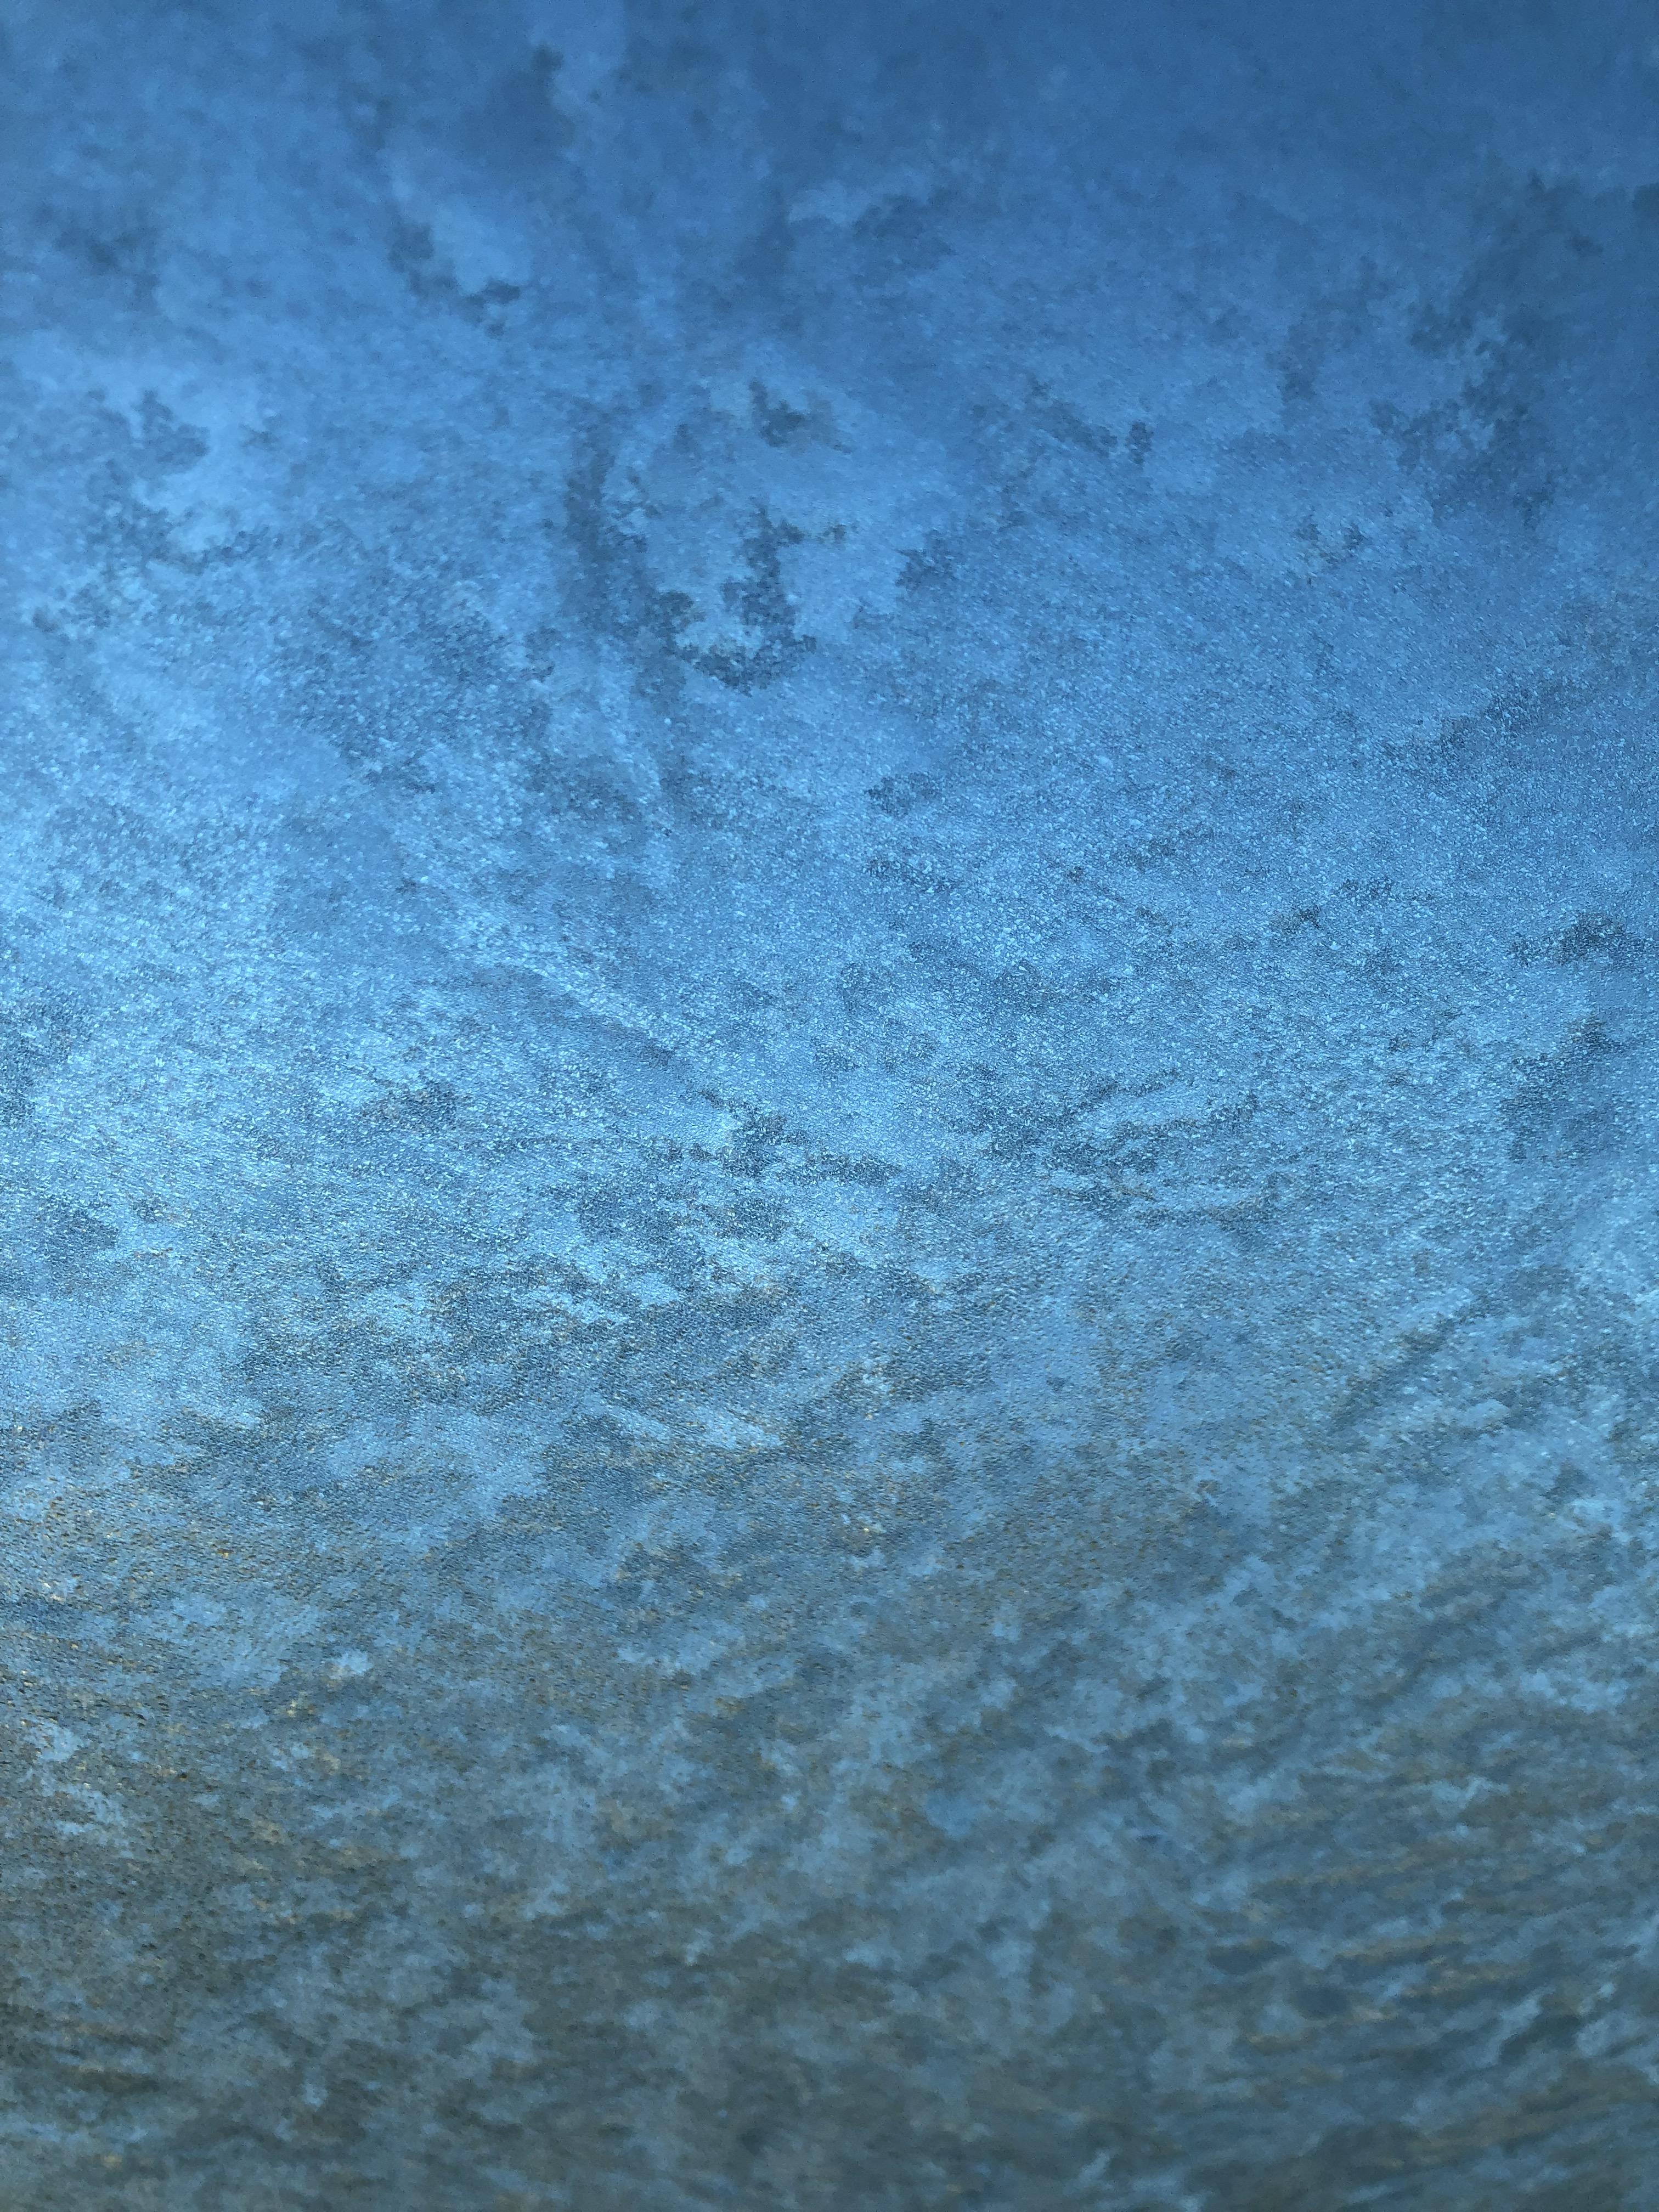 Took this yesterday morning. Frost on my windshield. It's